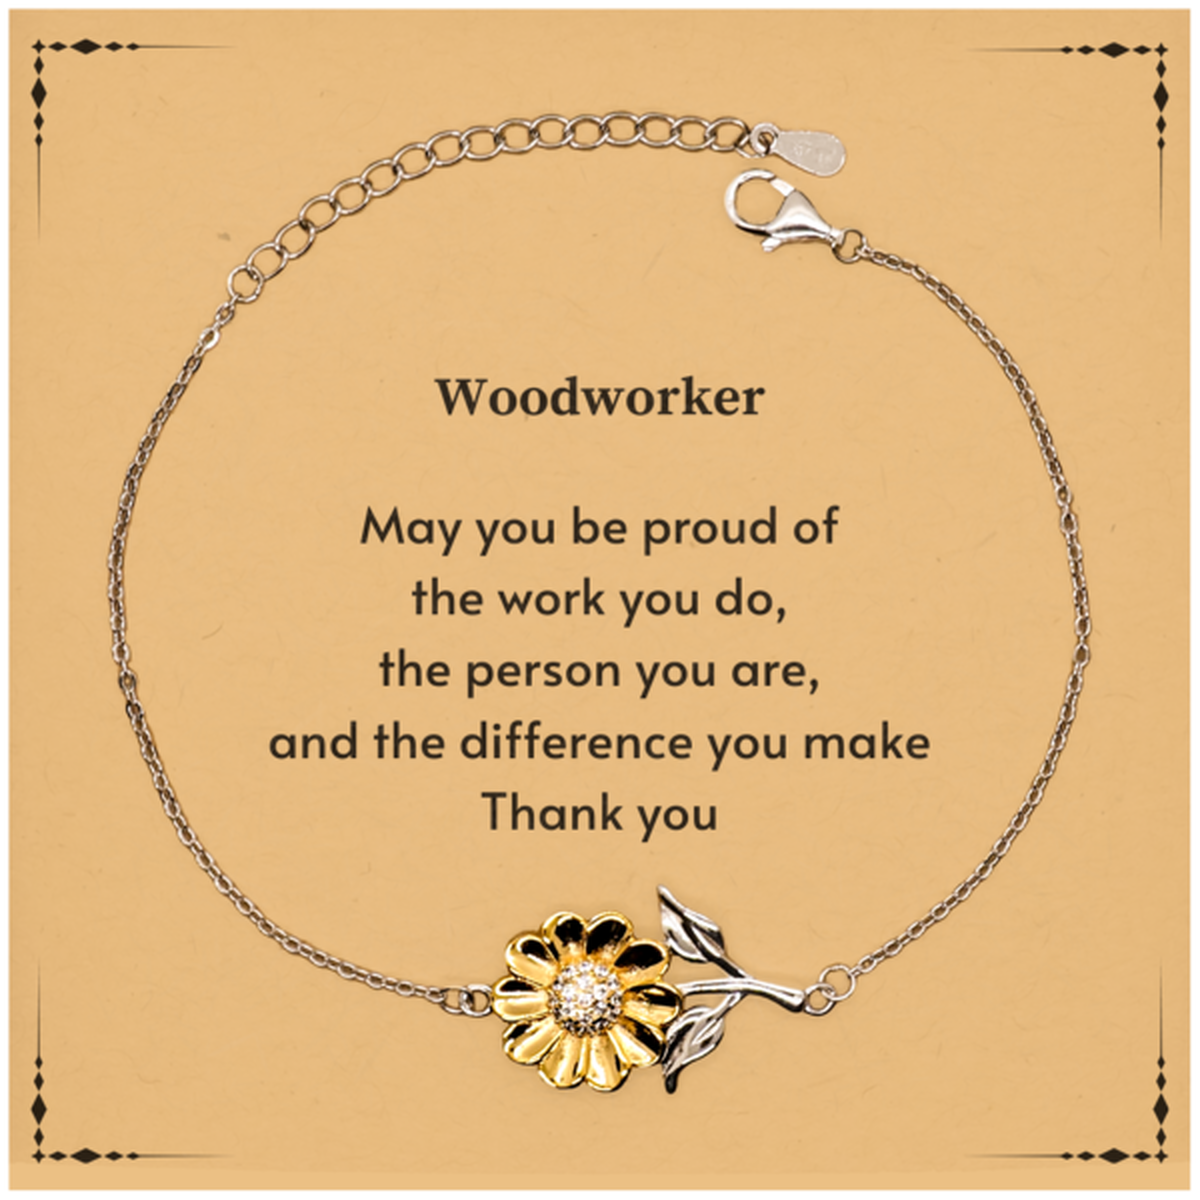 Heartwarming Sunflower Bracelet Retirement Coworkers Gifts for Woodworker, Woodworker May You be proud of the work you do, the person you are Gifts for Boss Men Women Friends